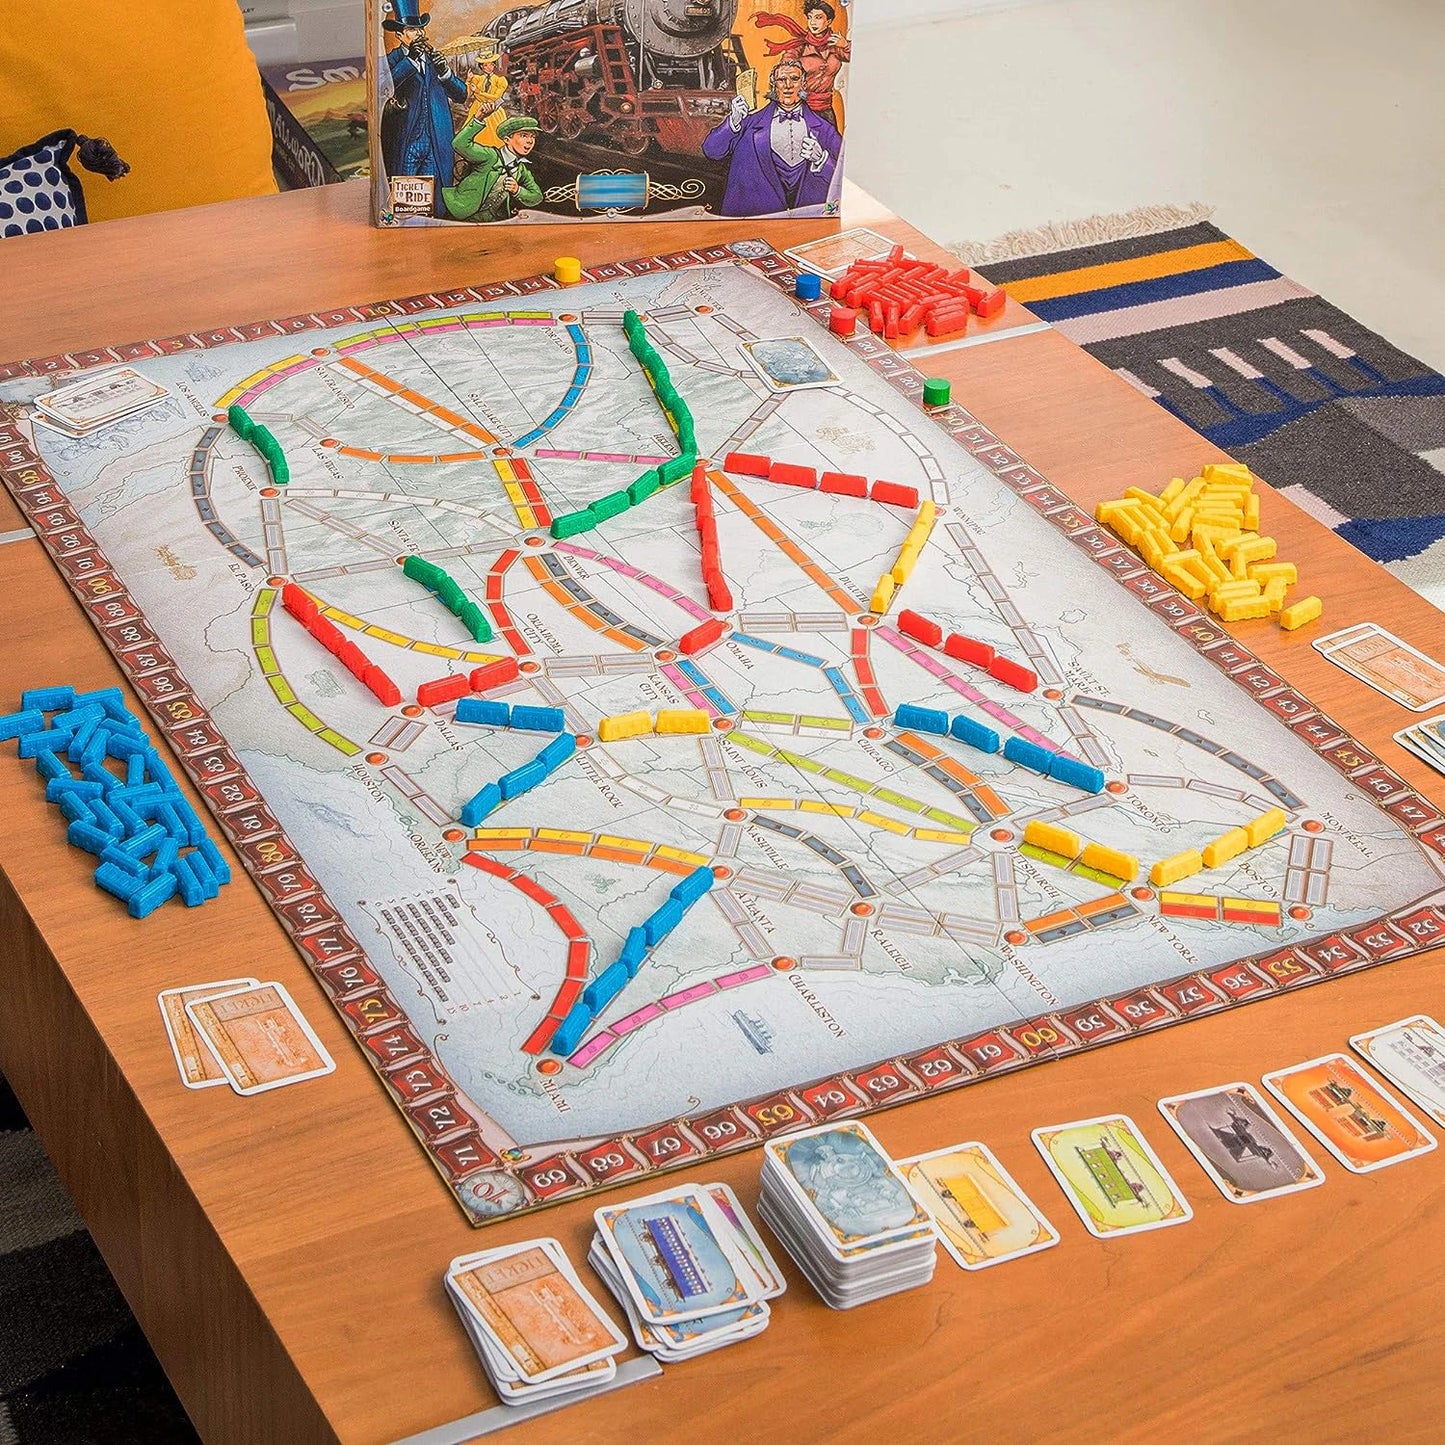 Ticket to Ride: The Cross-country Train Adventure Game!